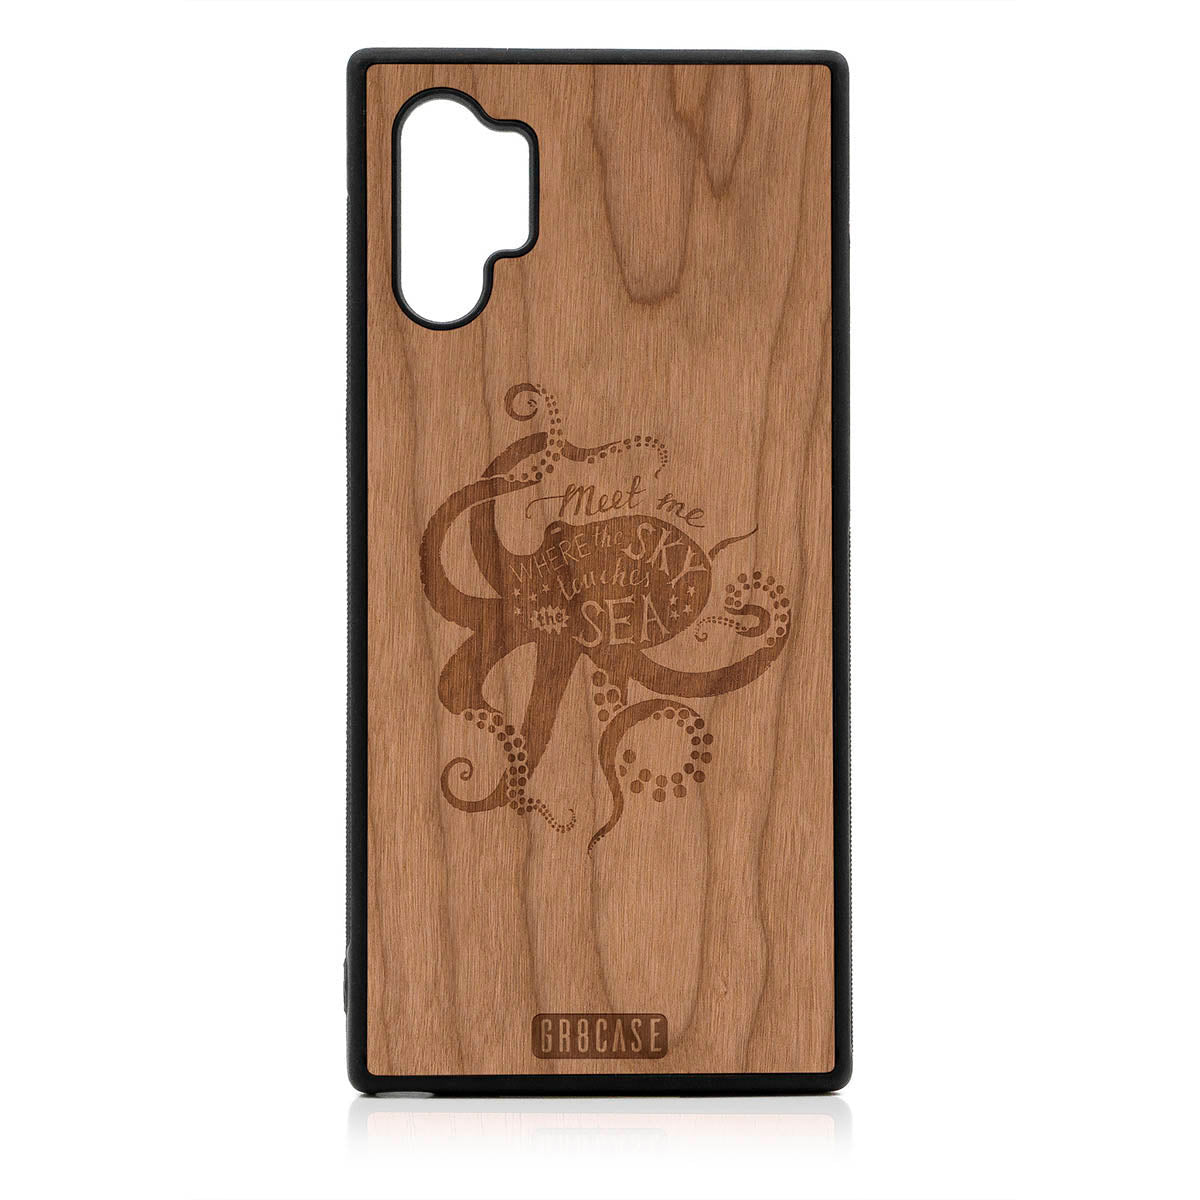 Meet Me Where The Sky Touches The Sea (Octopus) Design Wood Case For Samsung Galaxy Note 10 Plus